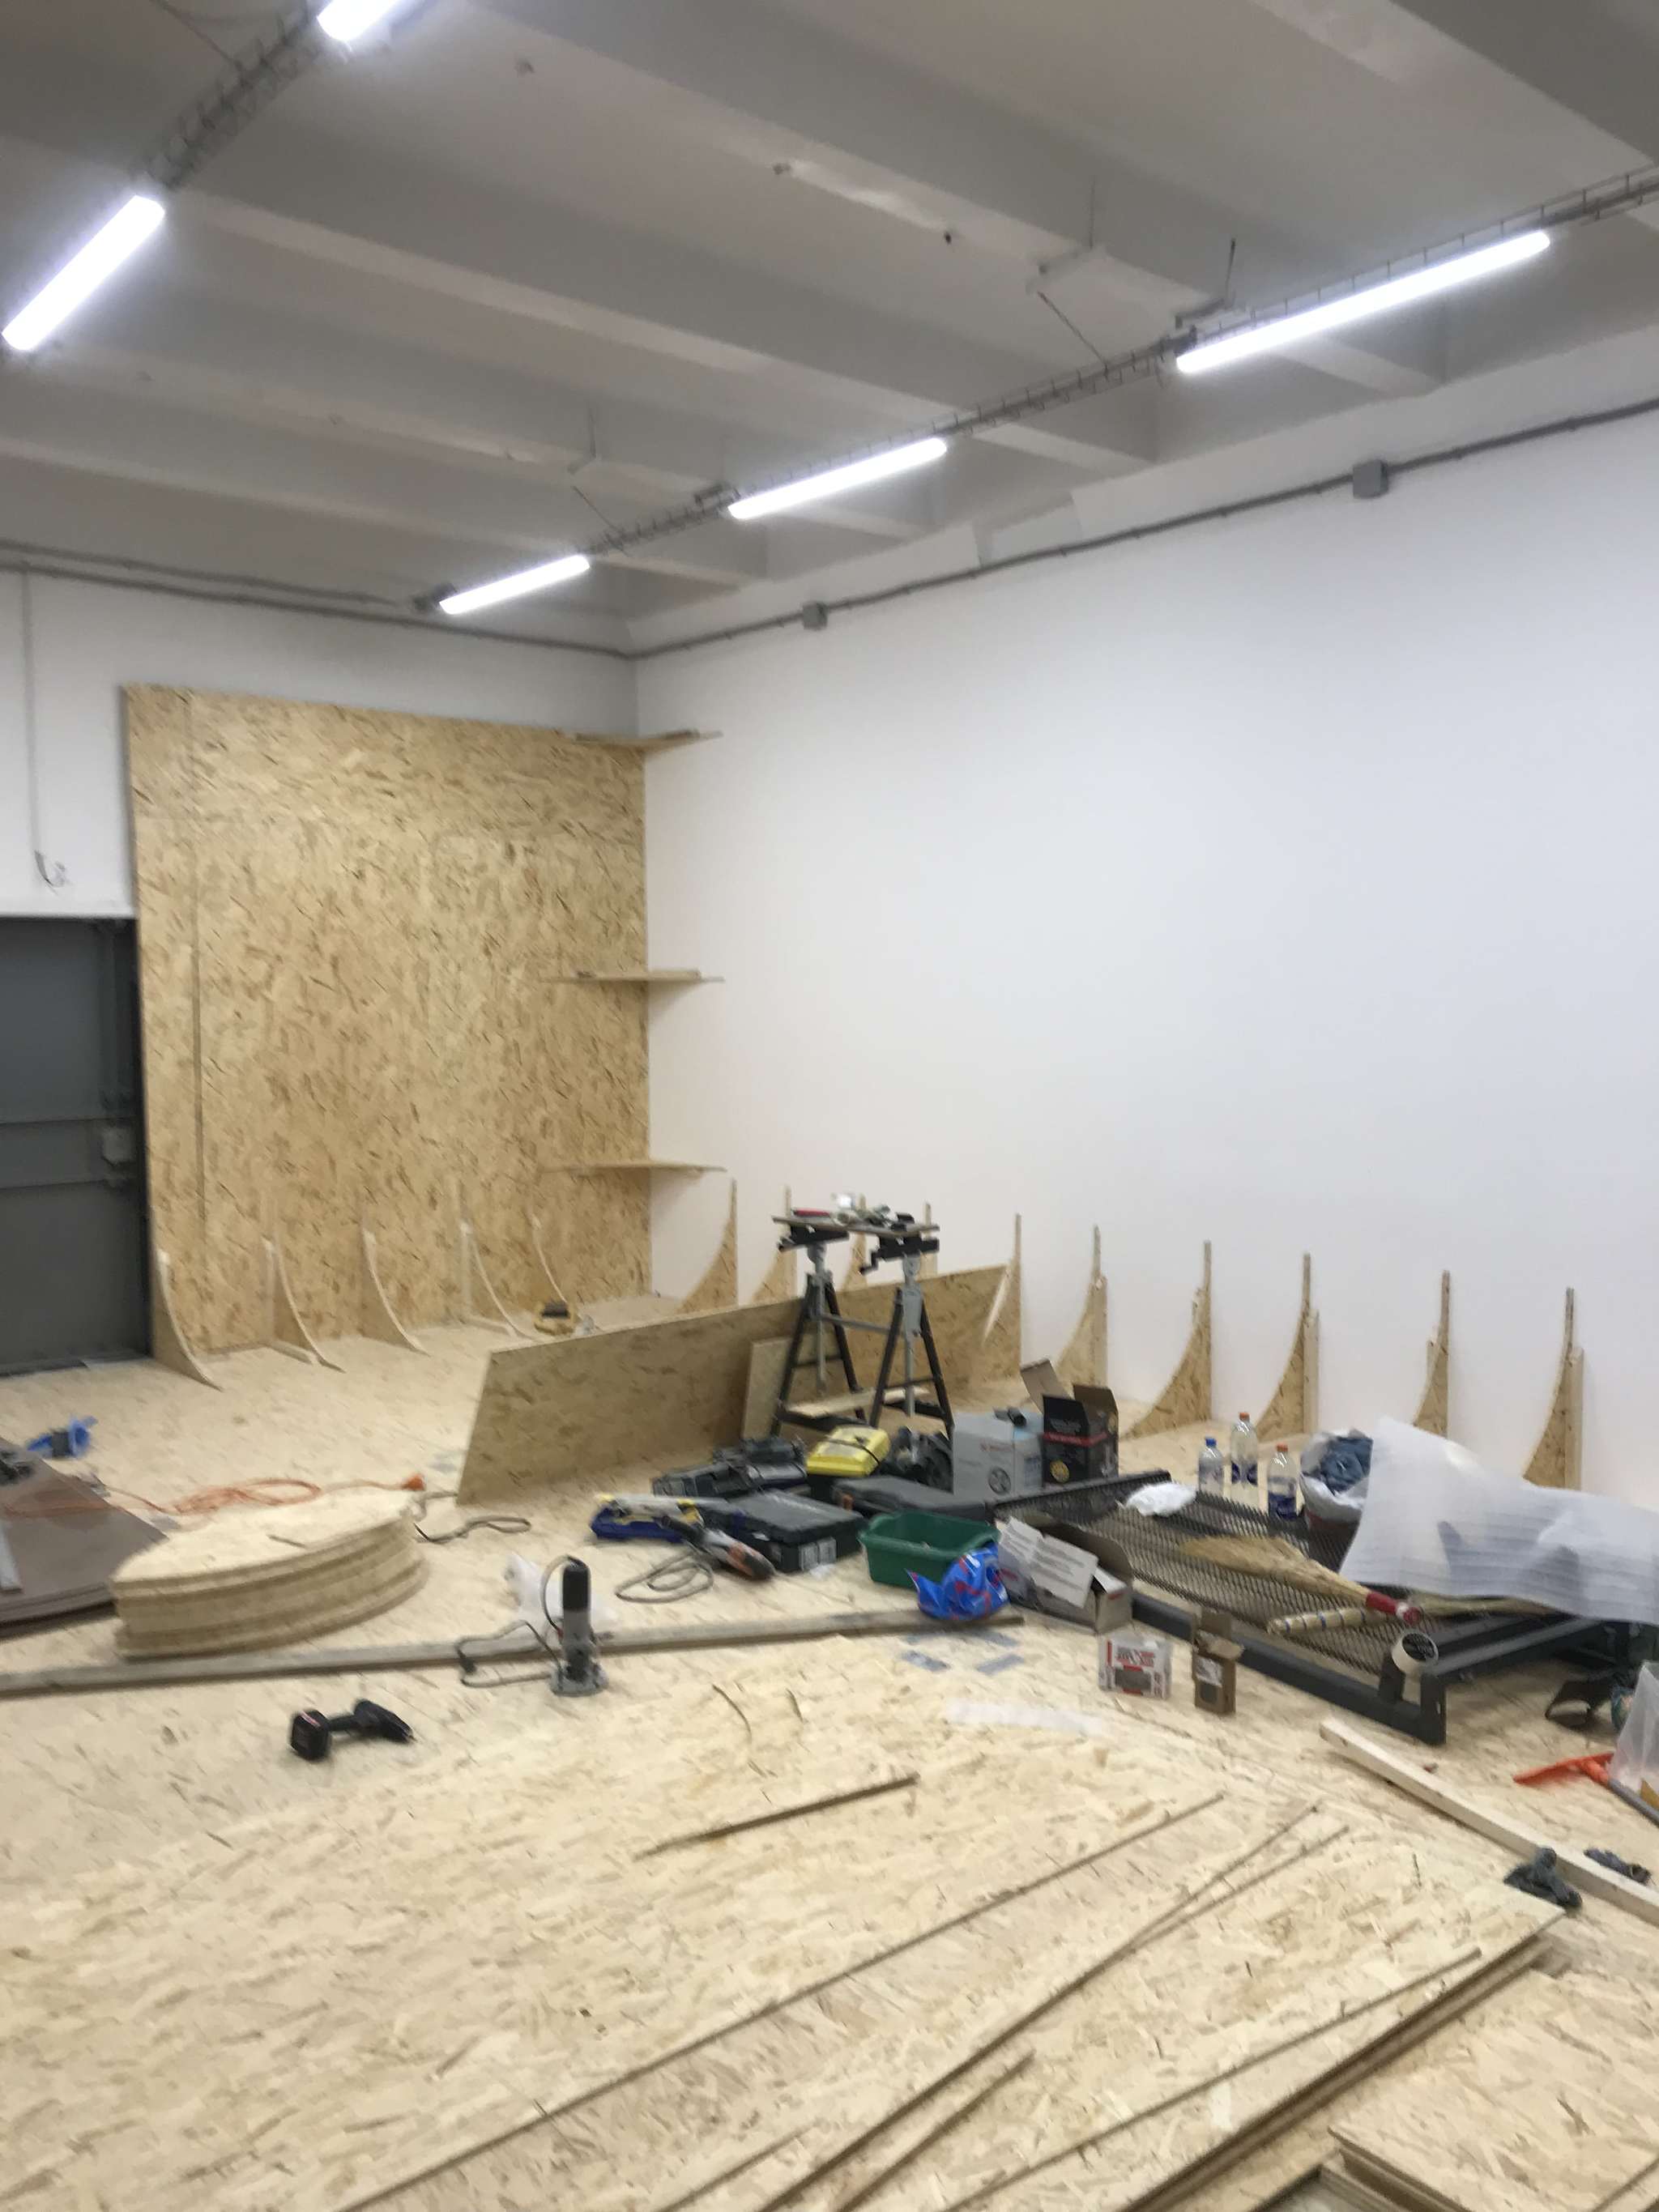 Hello World - Part 7 - Building the Cyclorama - My, Photo studio, Small business, Business, Networking, Photographer, The photo, Starting a business, Voronezh, friendship, Longpost, Construction, Entrepreneurship, Nikon, Network, Beginning photographer, PHOTOSESSION